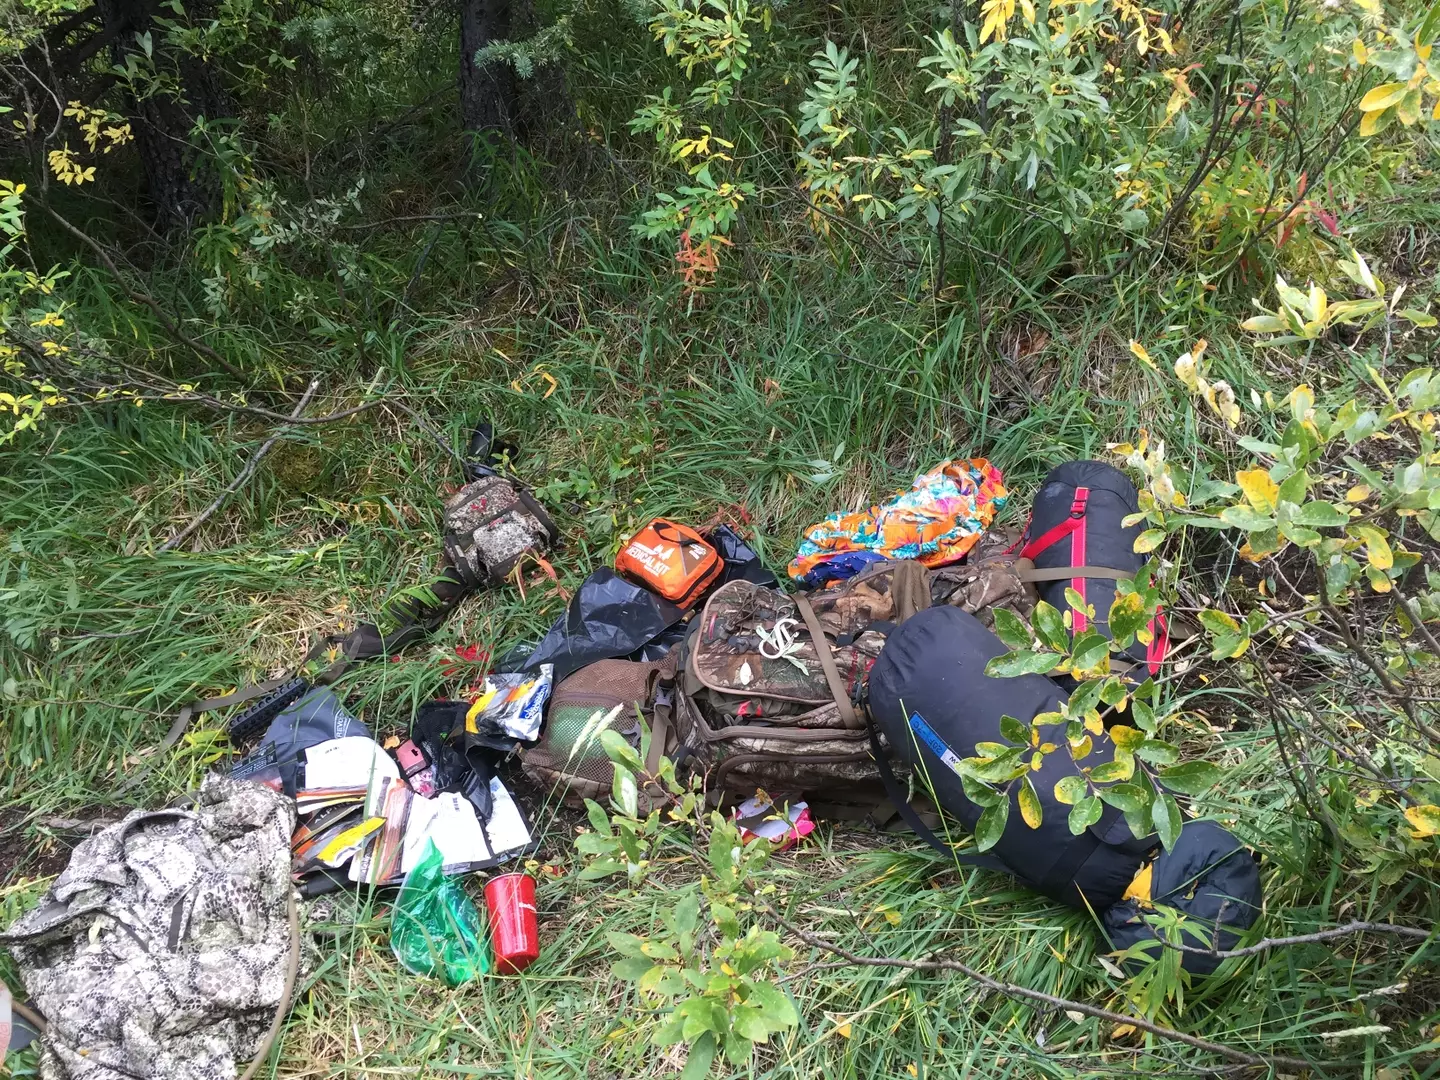 Jeremy's belongings were scattered in the woods after the attack.